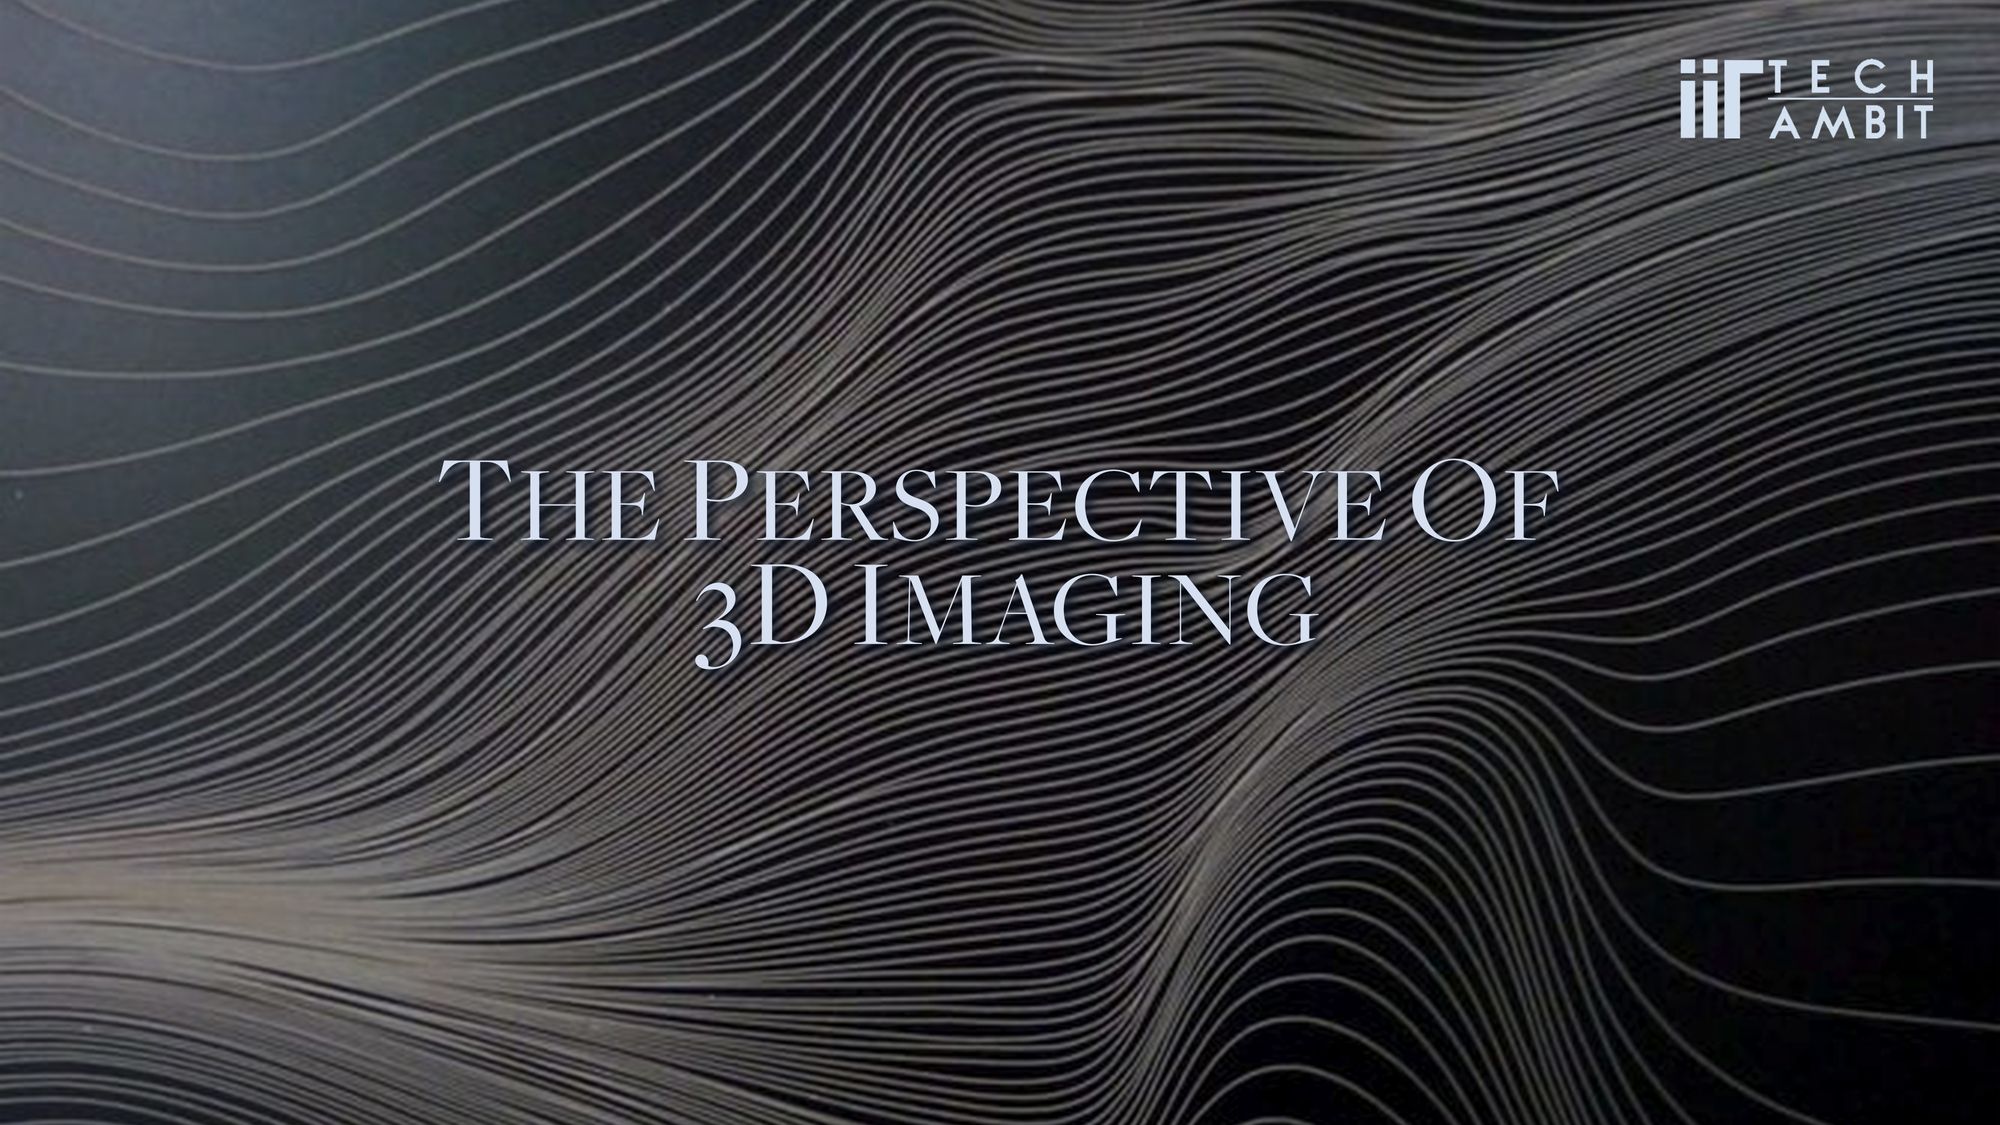 The Perspective of 3D Imaging